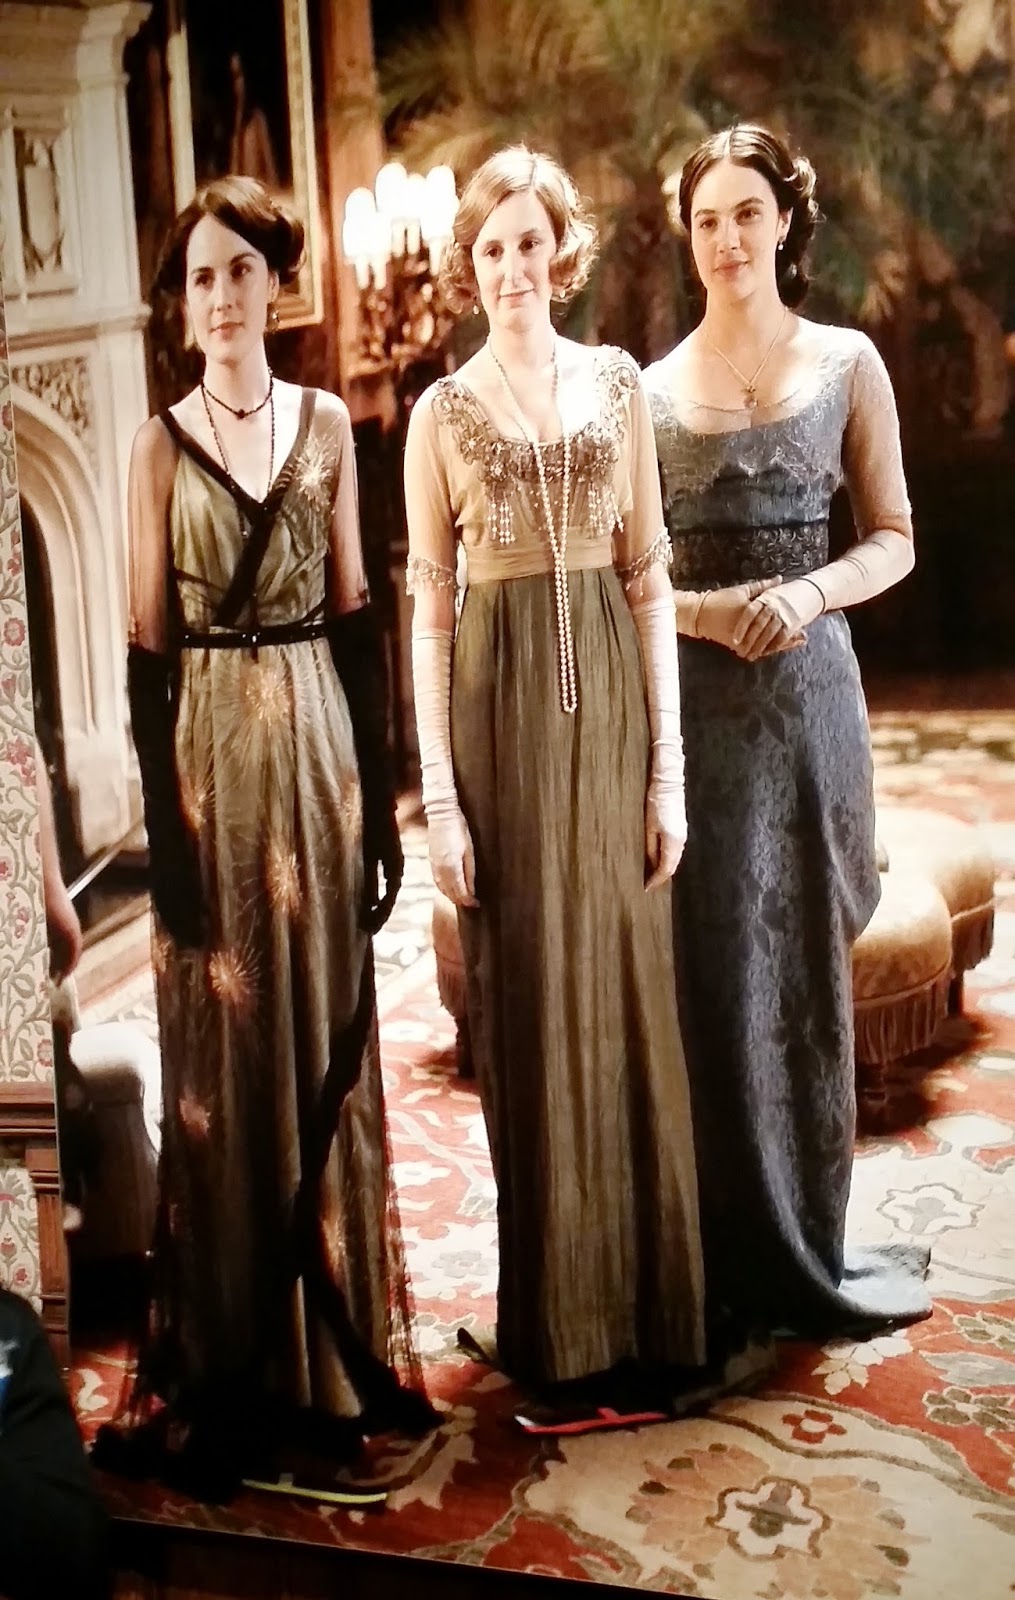 Von and Carolyn Christensen : LUCKY US !!!!! DOWNTON ABBEY COSTUME DISPLAY